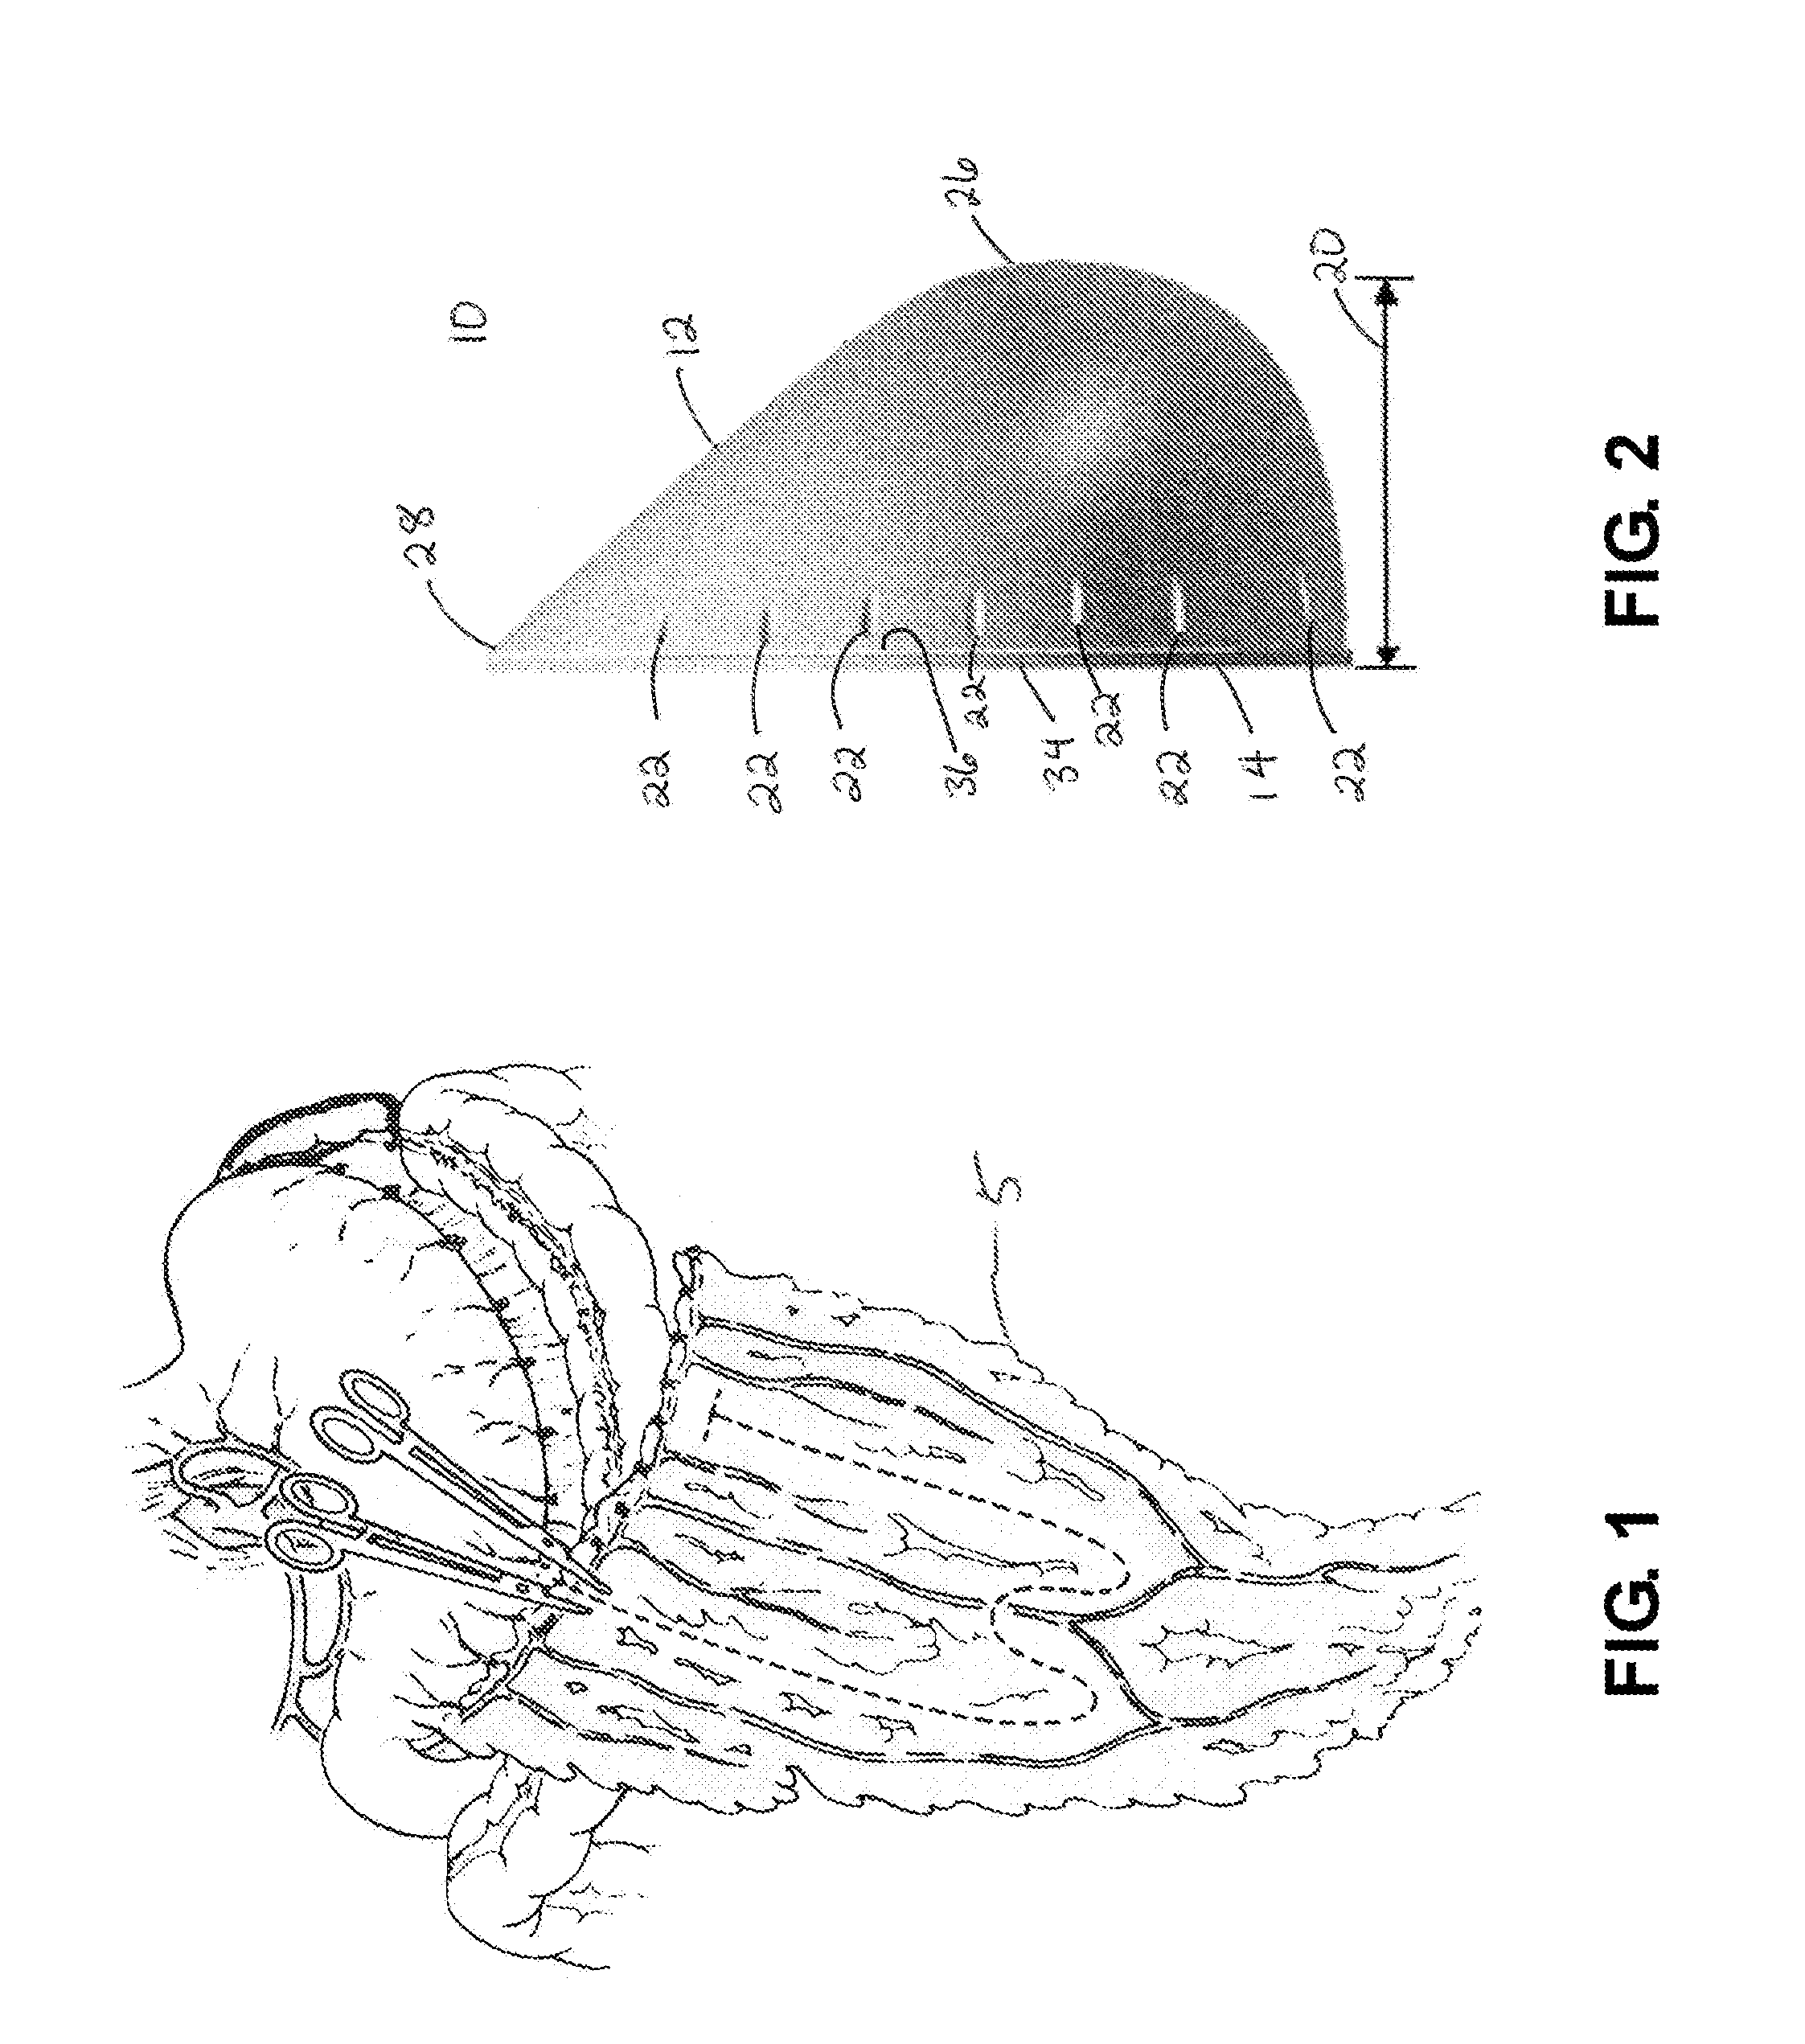 Breast Reconstruction Device and Methods